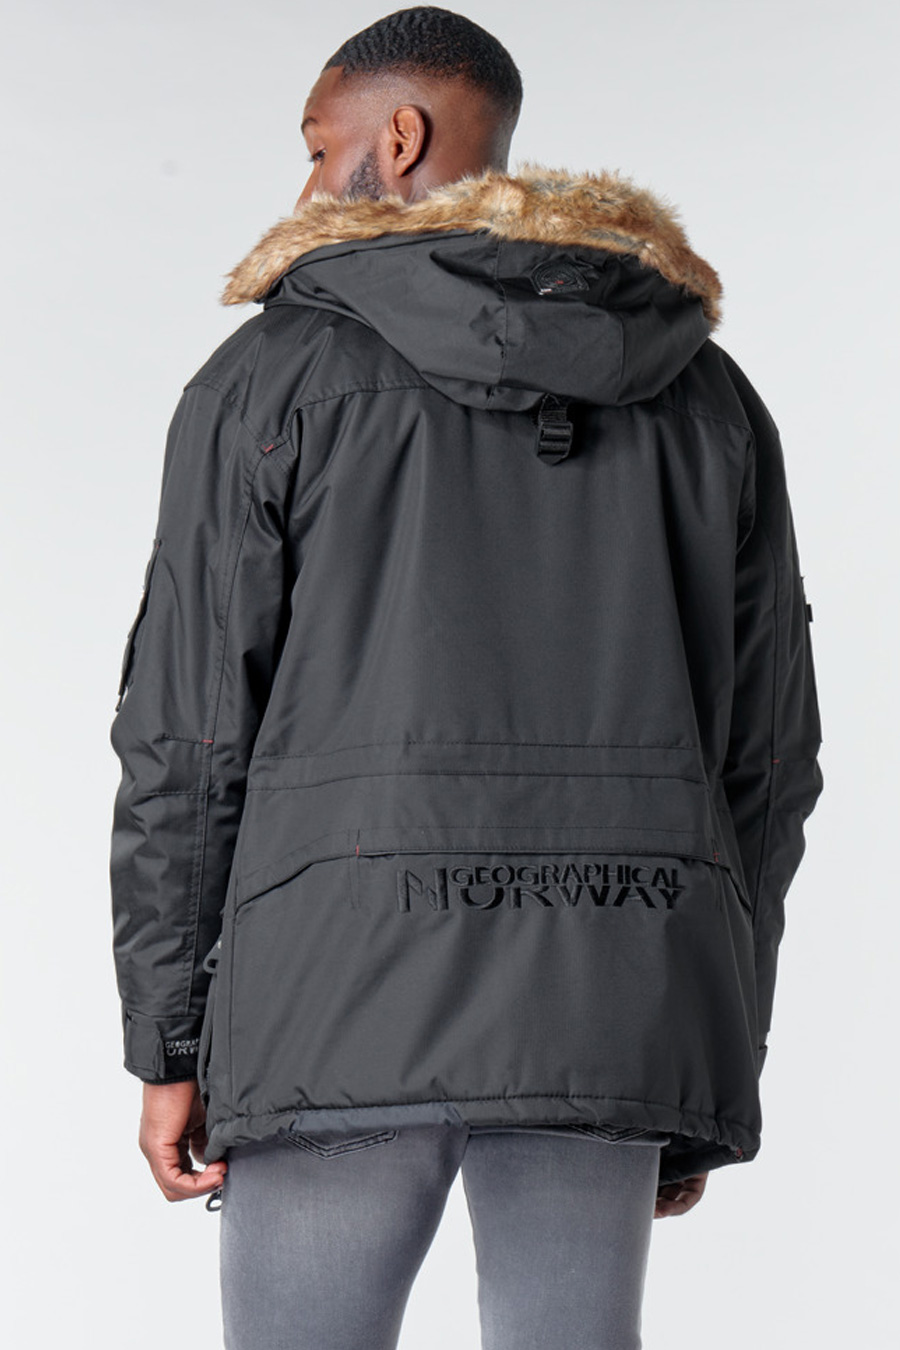 Talvejoped GEOGRAPHICAL NORWAY ABIOSAURE-Black